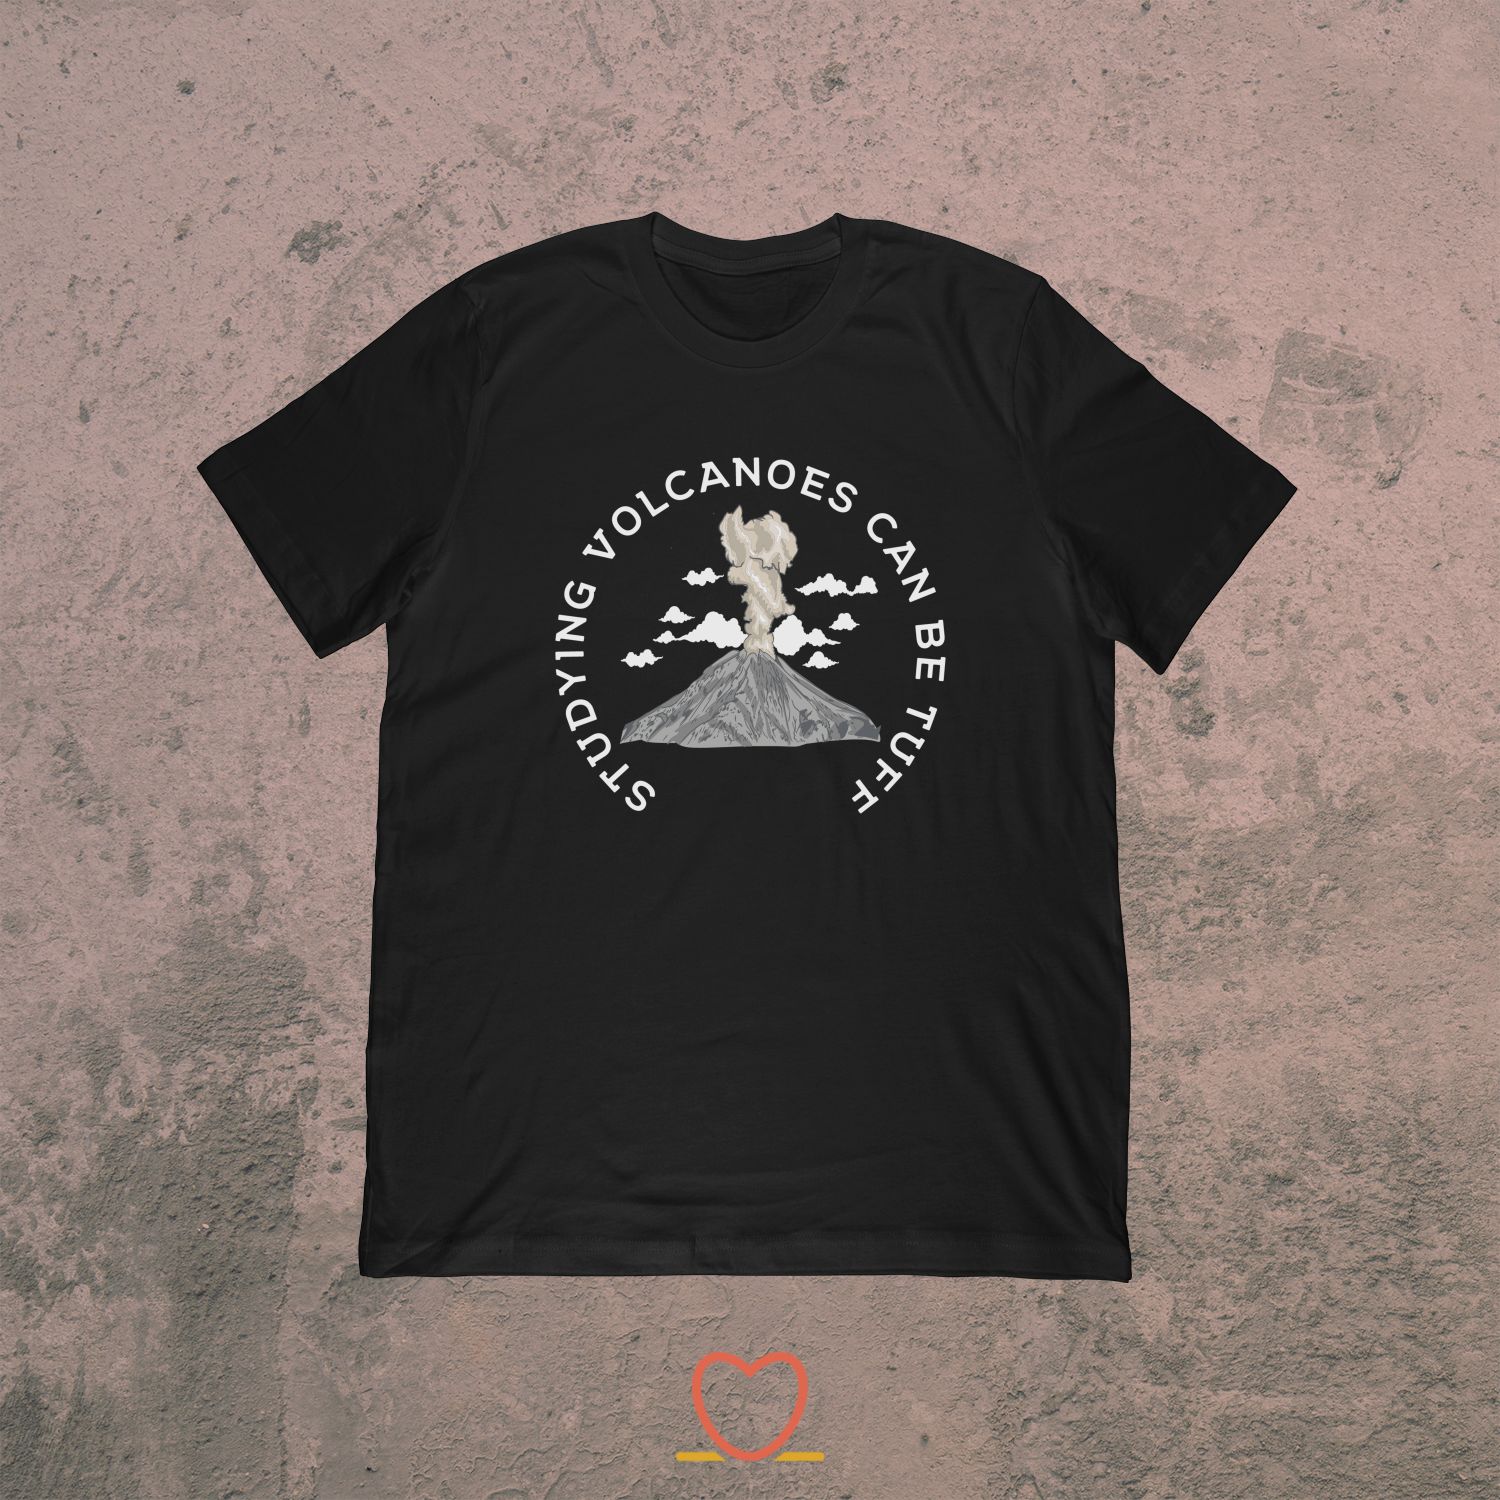 Studying Volcanoes Can Be Tuff – Volcanologist Tee